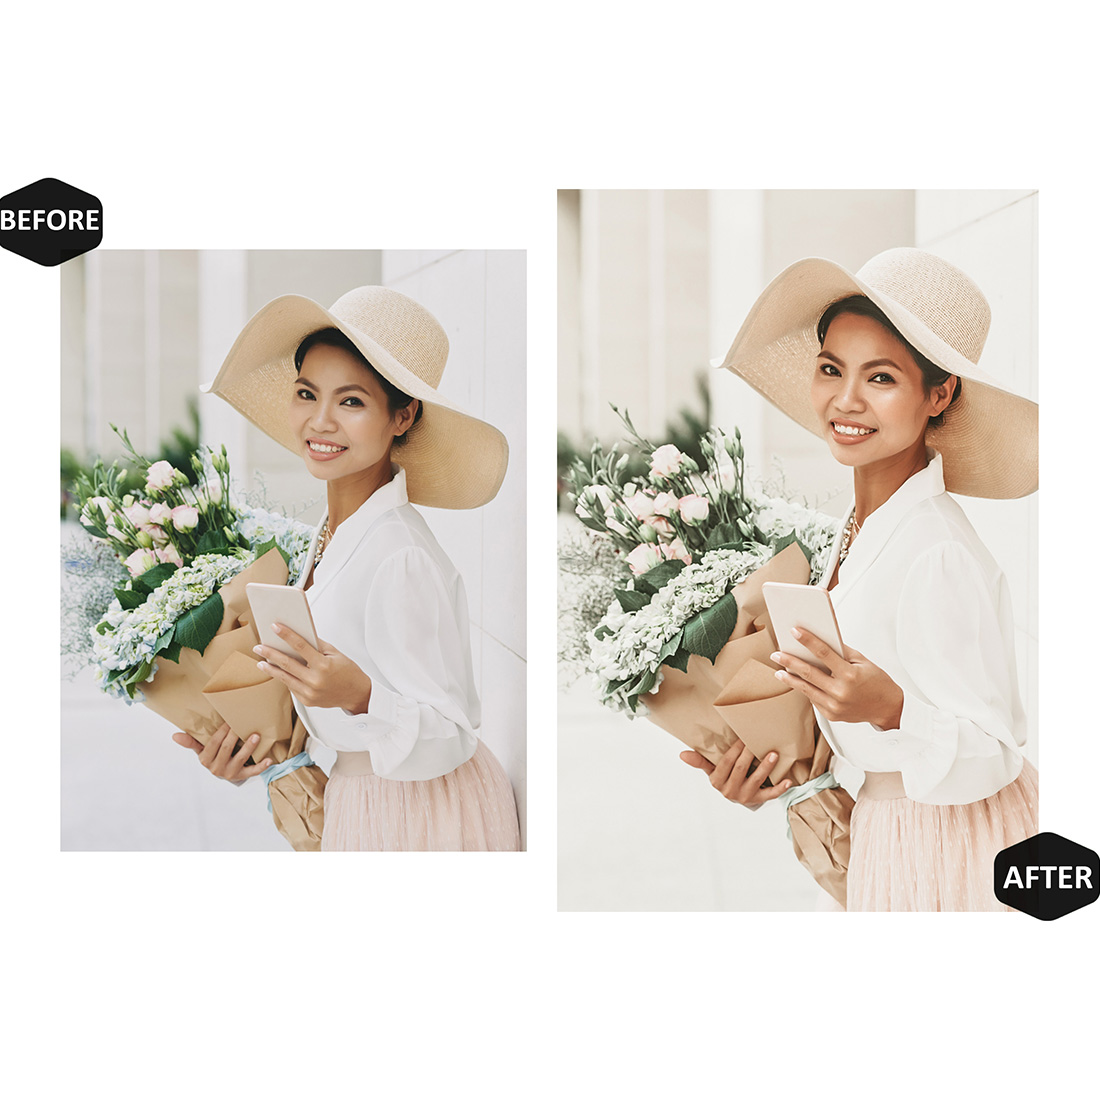 12 Photoshop Actions, Girly Spring Ps Action, Espresso ACR Preset, Bright Cream Ps Filter, Atn Portrait And Lifestyle Theme For Instagram, Blogger preview image.